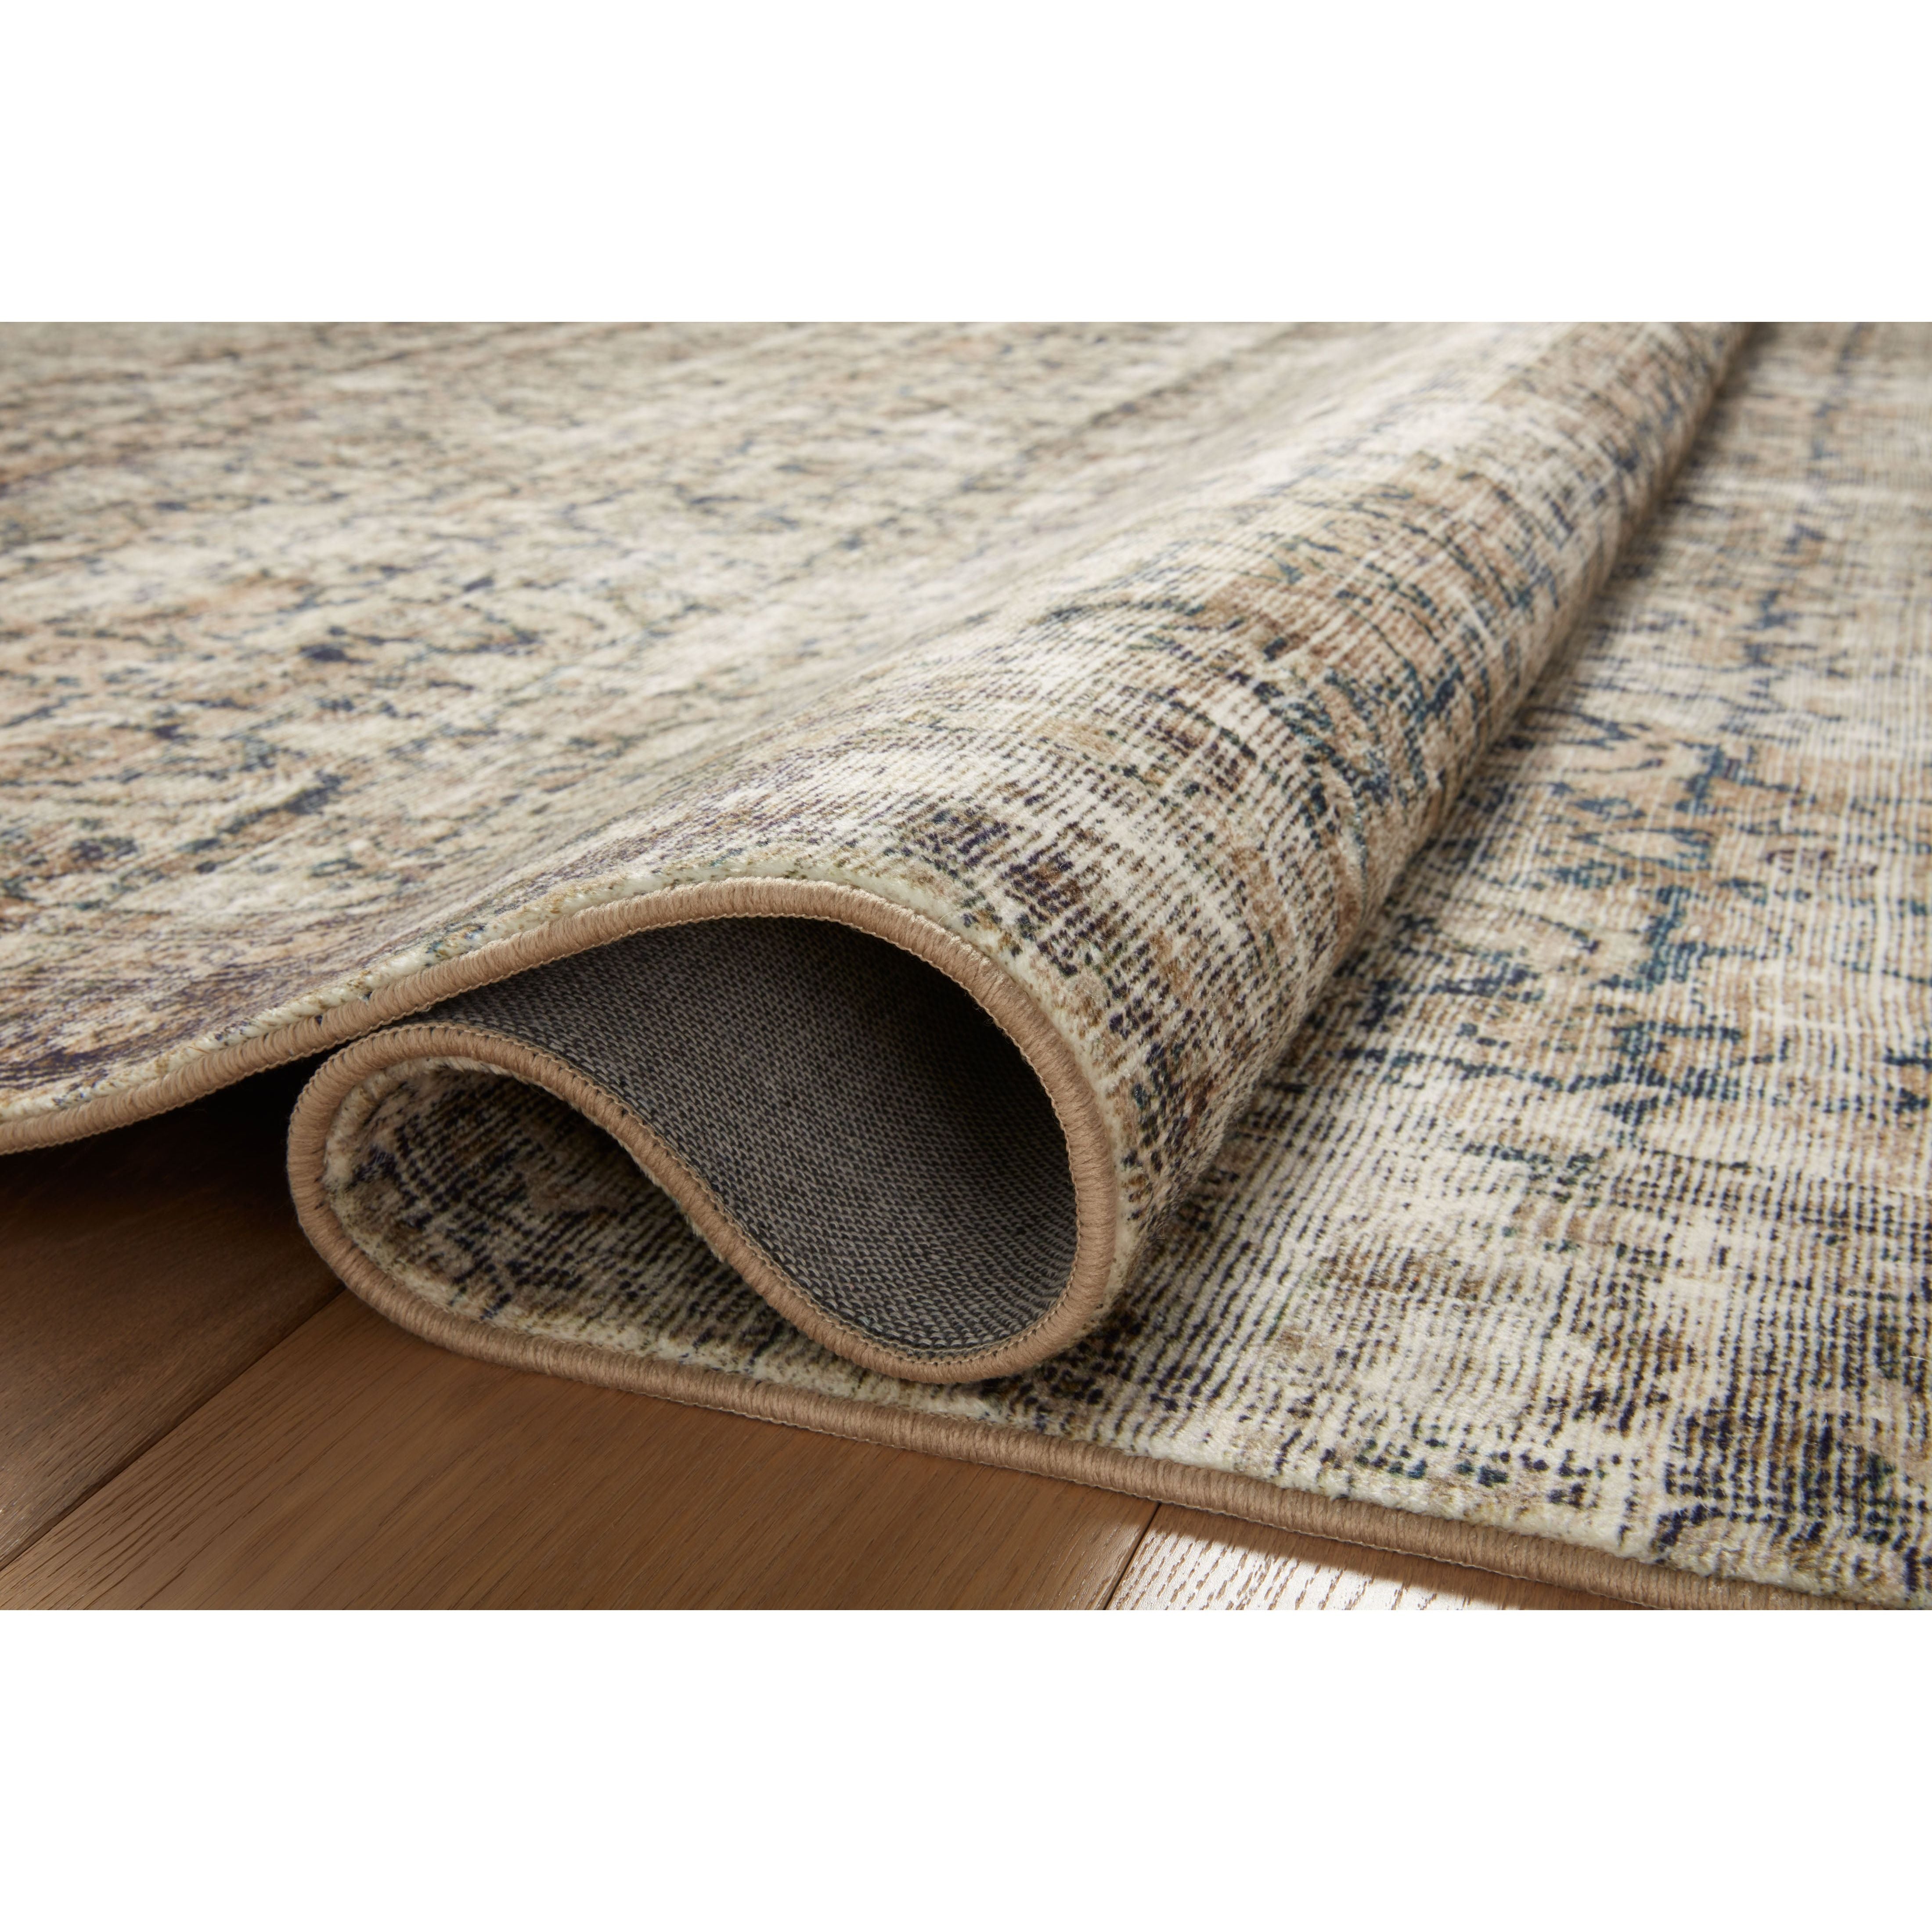 With the faded feel of an antique rug, the Amber Lewis x Loloi Morgan Navy / Sand Rug is a feat of modern printed construction. These impressive area rugs expertly blend sophisticated tones to recreate the dynamic colors of a vintage textiles. Power-loomed of CloudPile™ construction, these rugs are extra-soft to walk upon yet still durable for high-traffic rooms. Amethyst Home provides interior design services, furniture, rugs, and lighting in the Calabasas metro area.